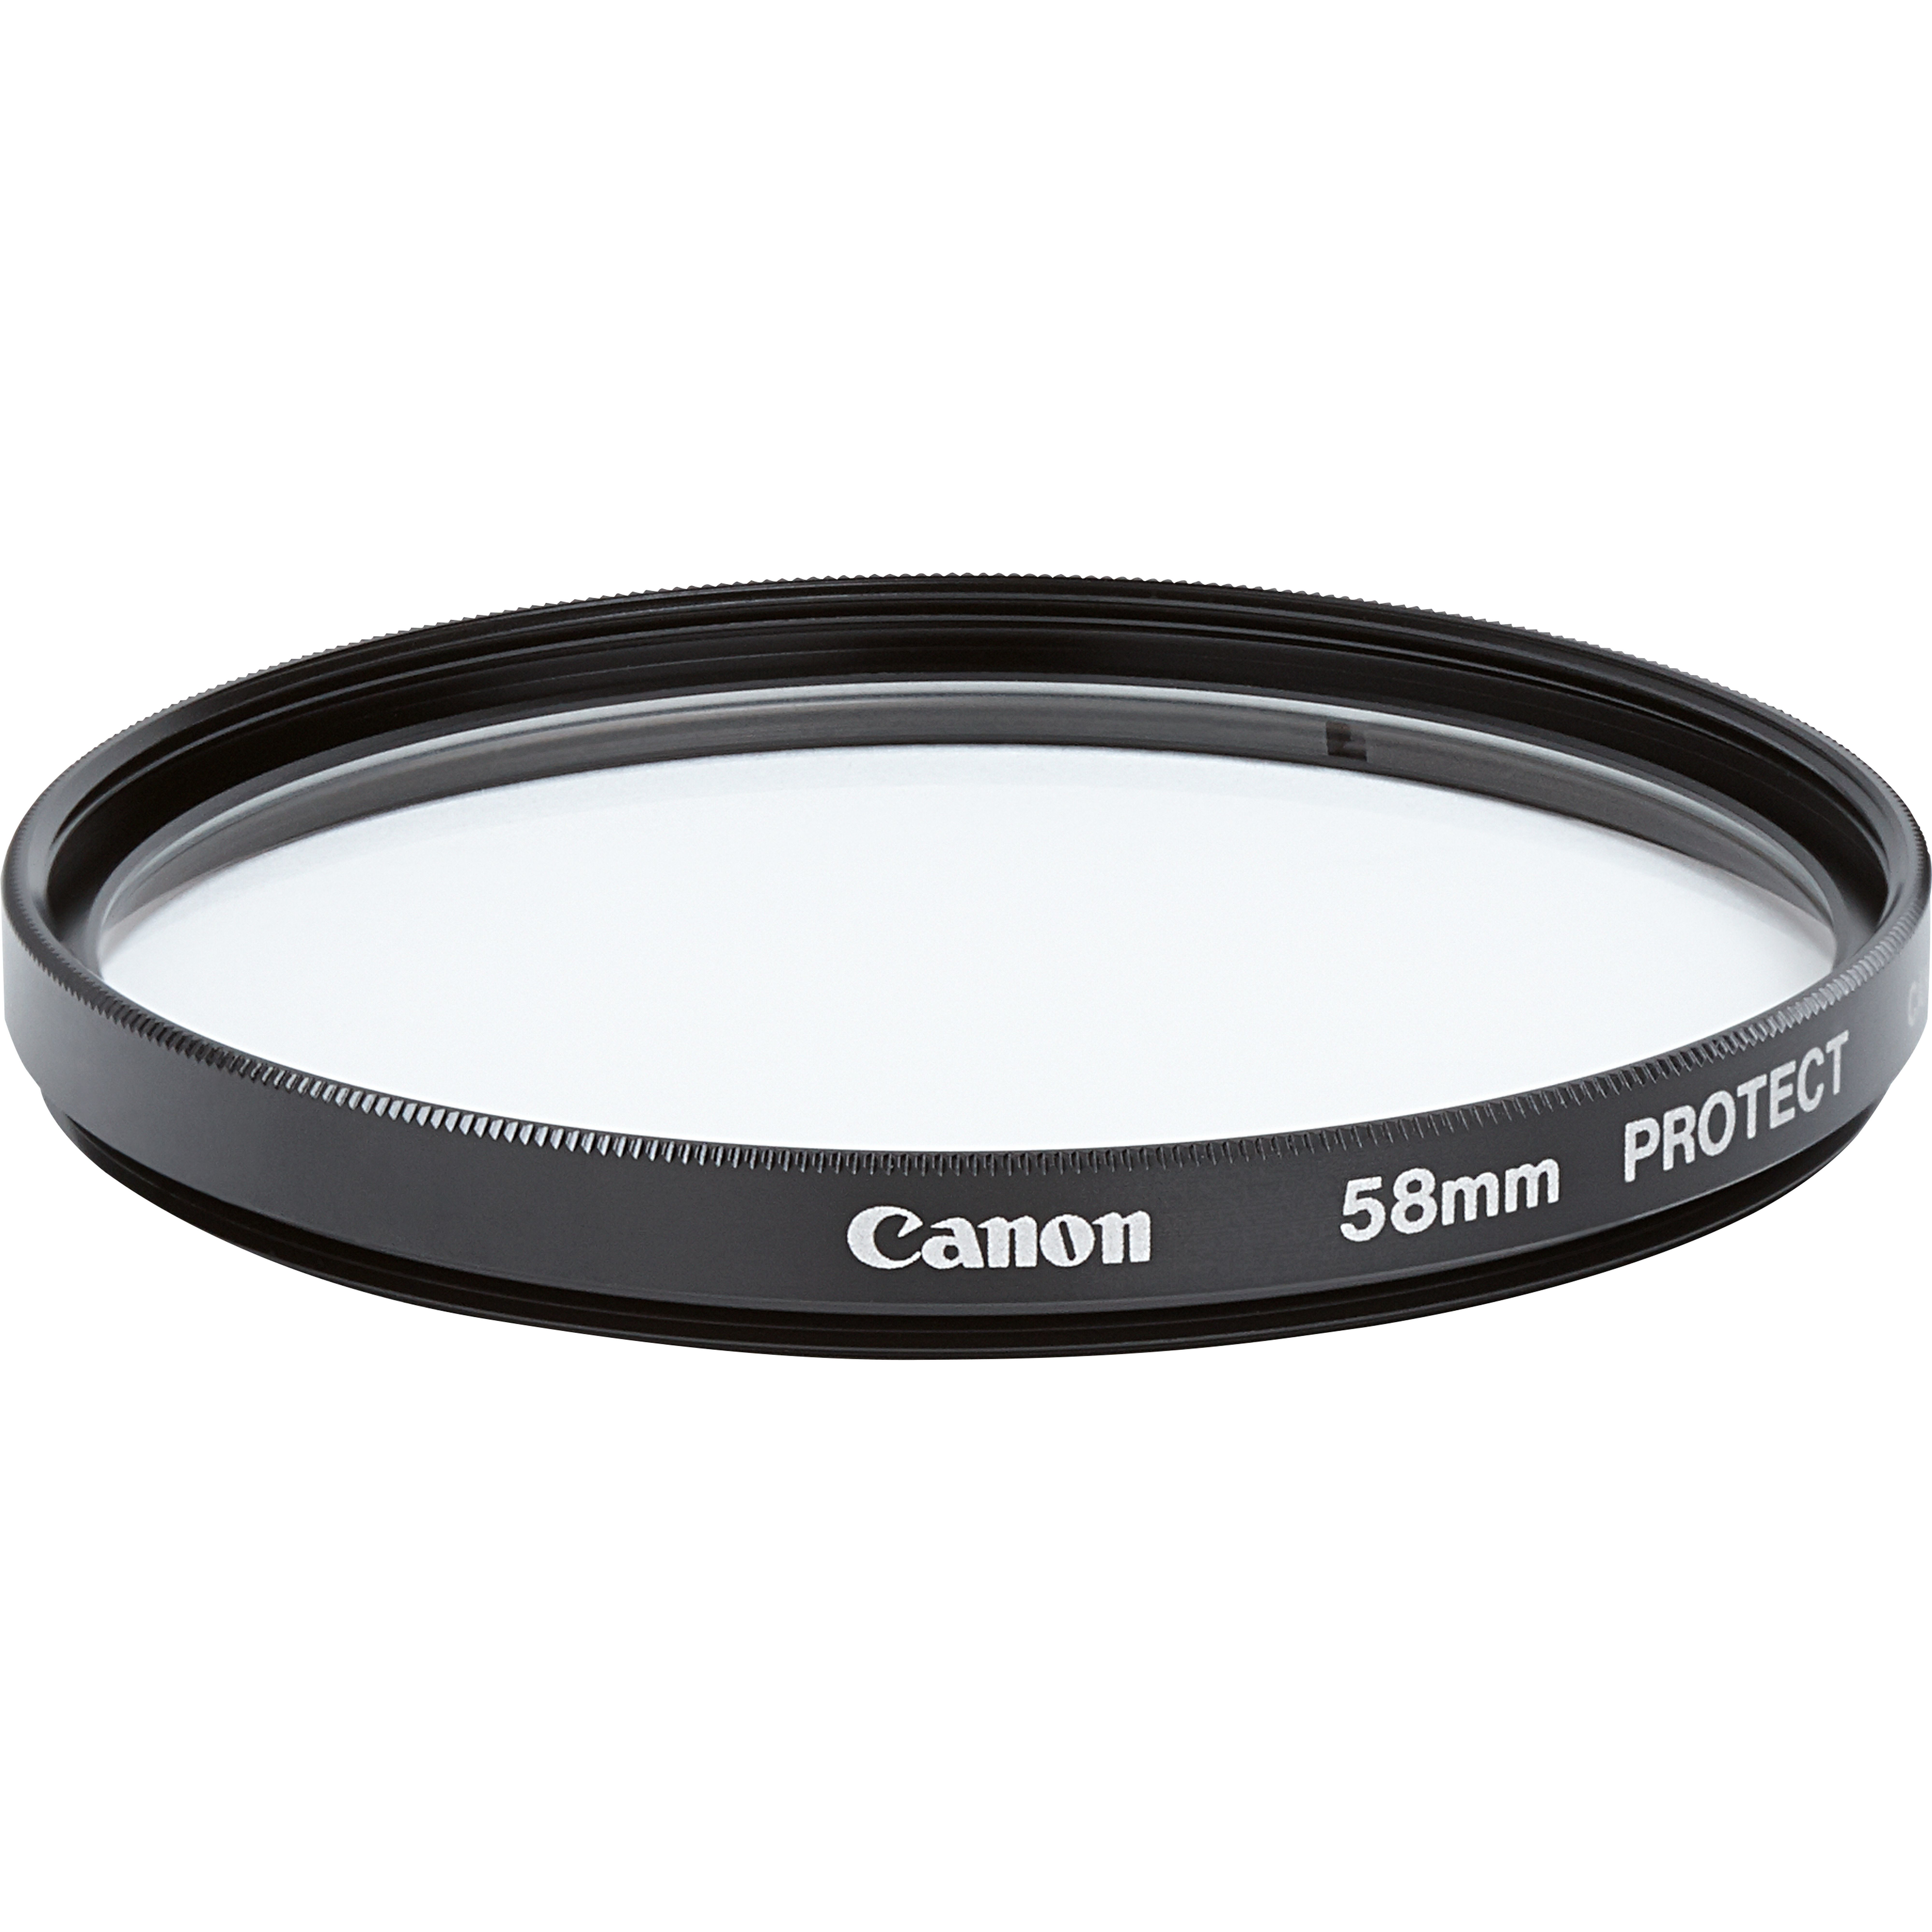 Canon - Filter - protection - 58 mm - for EF, EF-S, MP-E, TS E